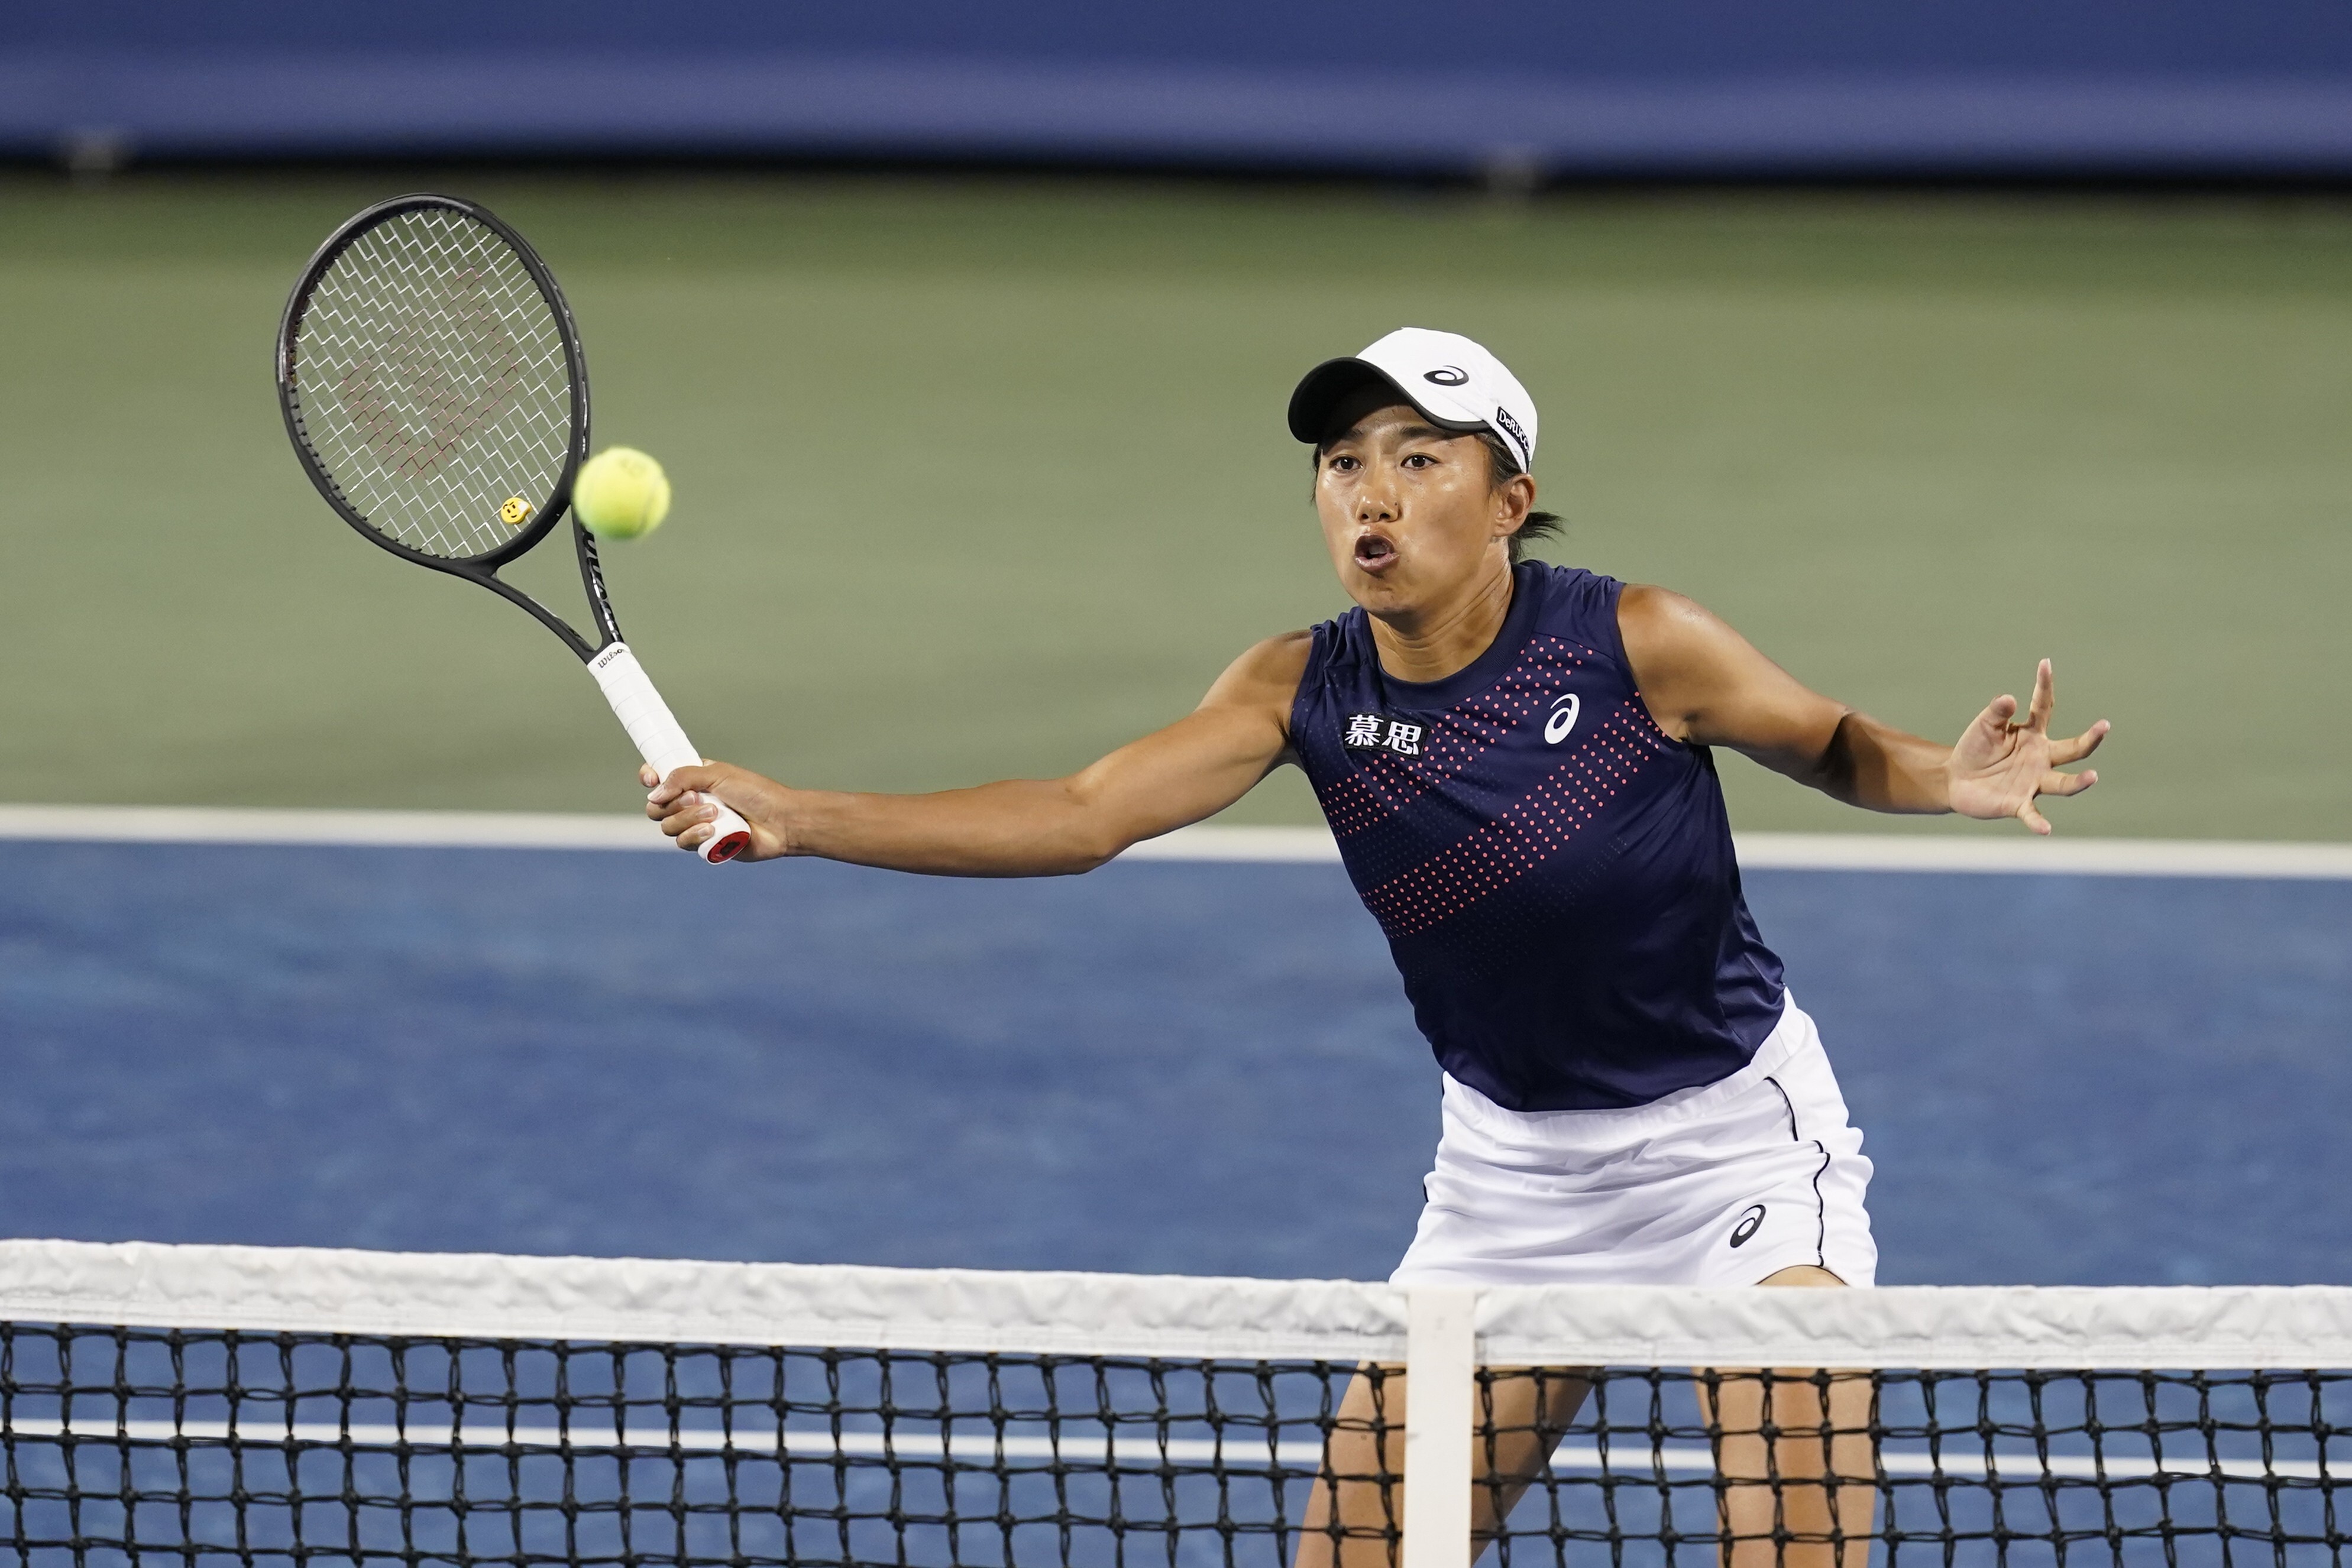 China’s Zhang Shuai in the women's double final of the 2021 Western & Southern Open. She will be the only Chinese player in the US Open this year. Photo: AP